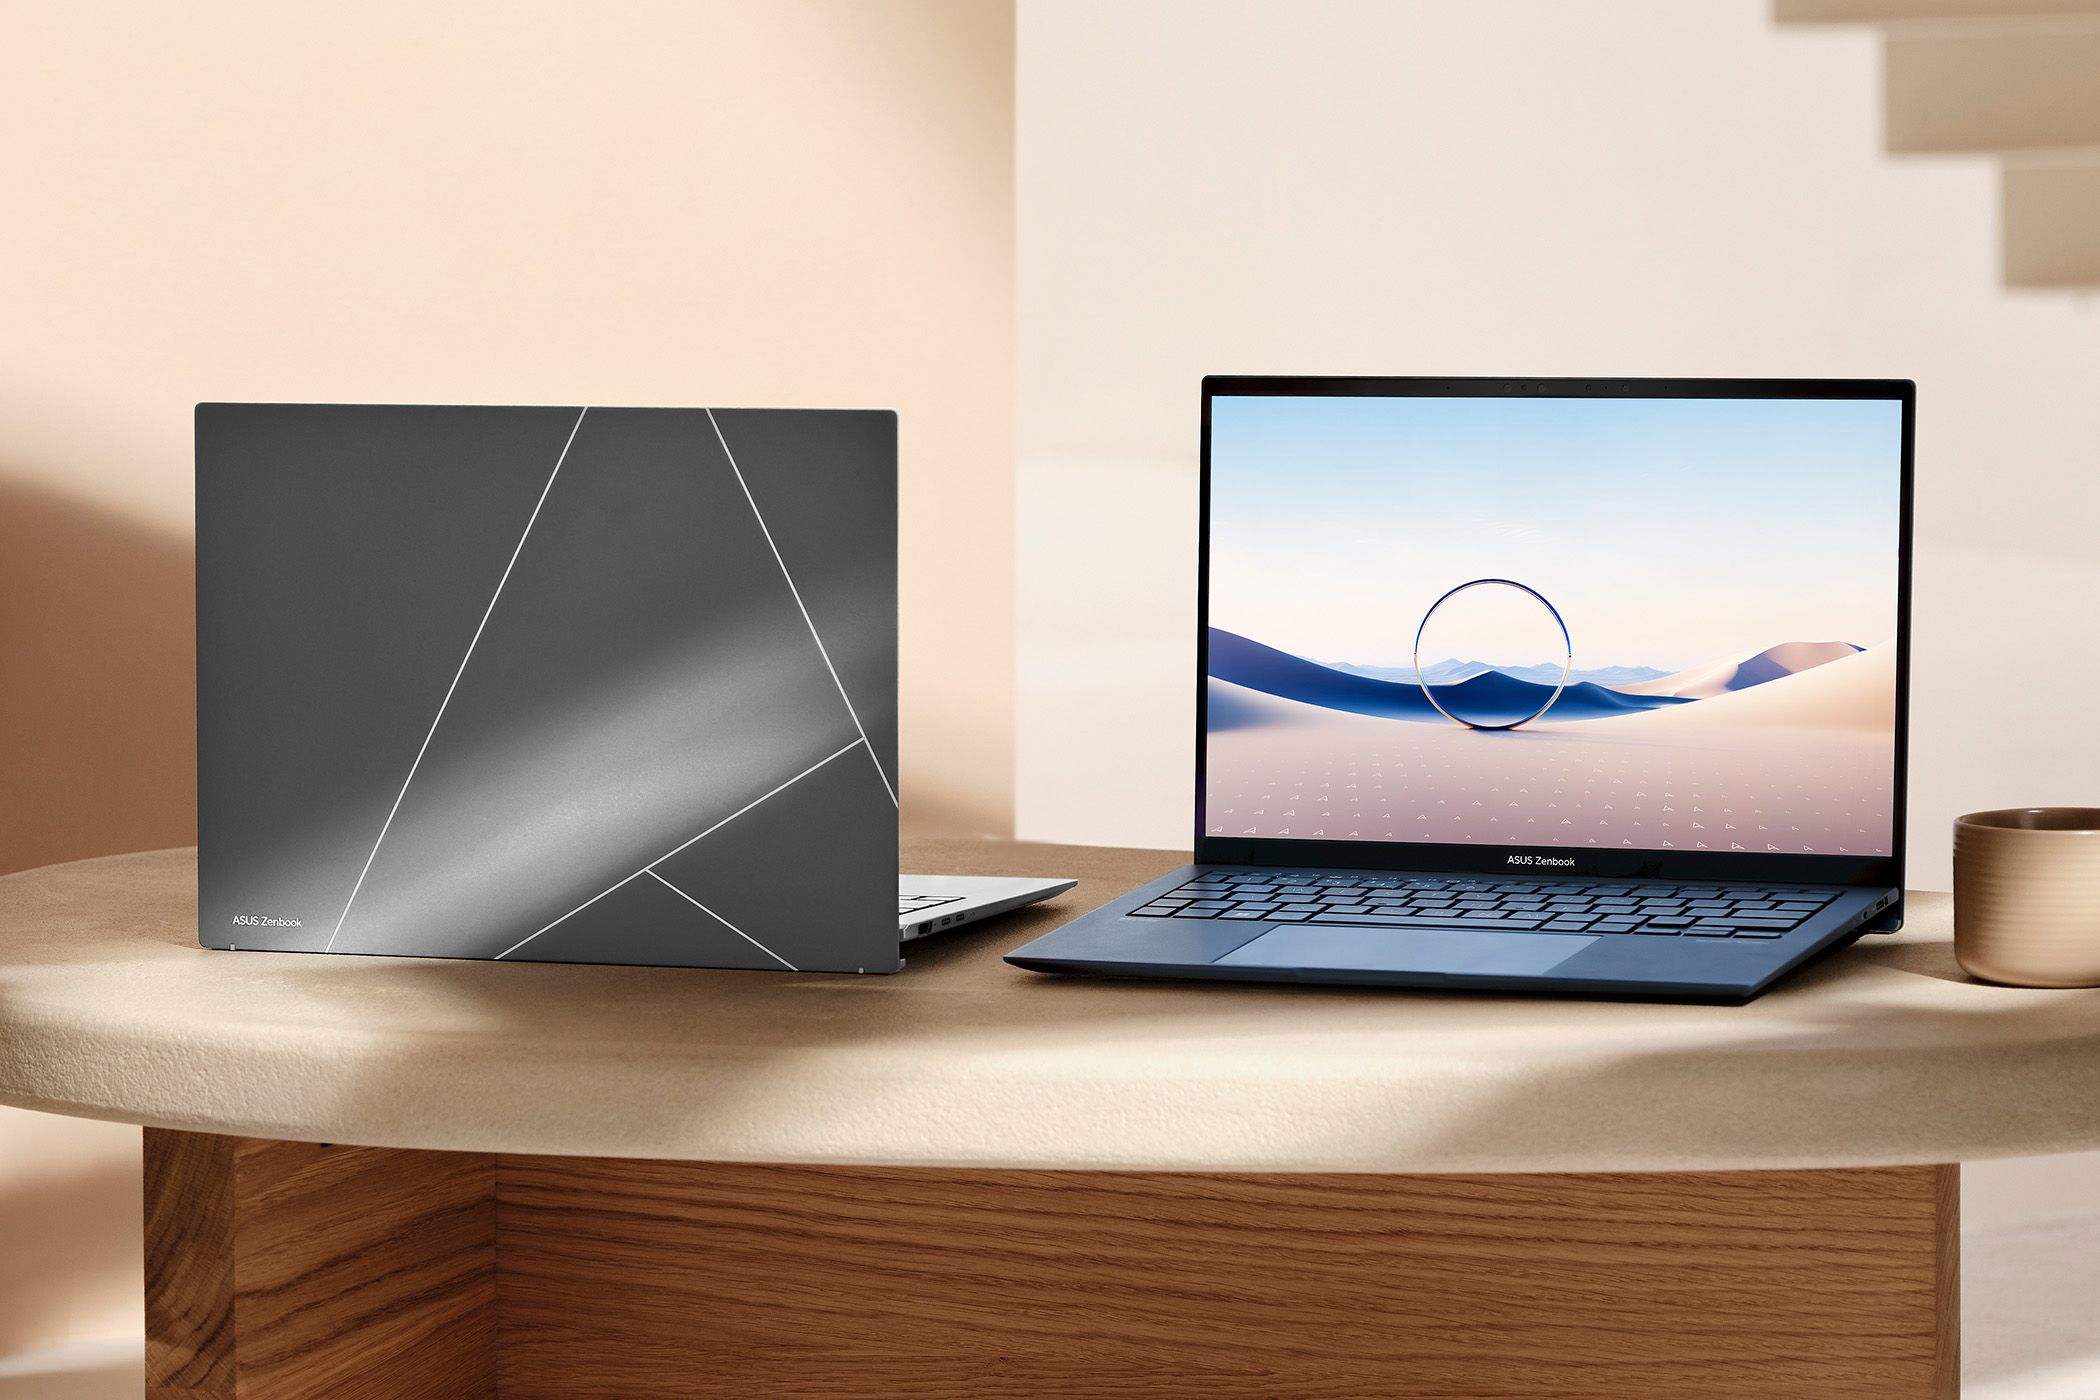 ASUS Zenbook front and back on a table